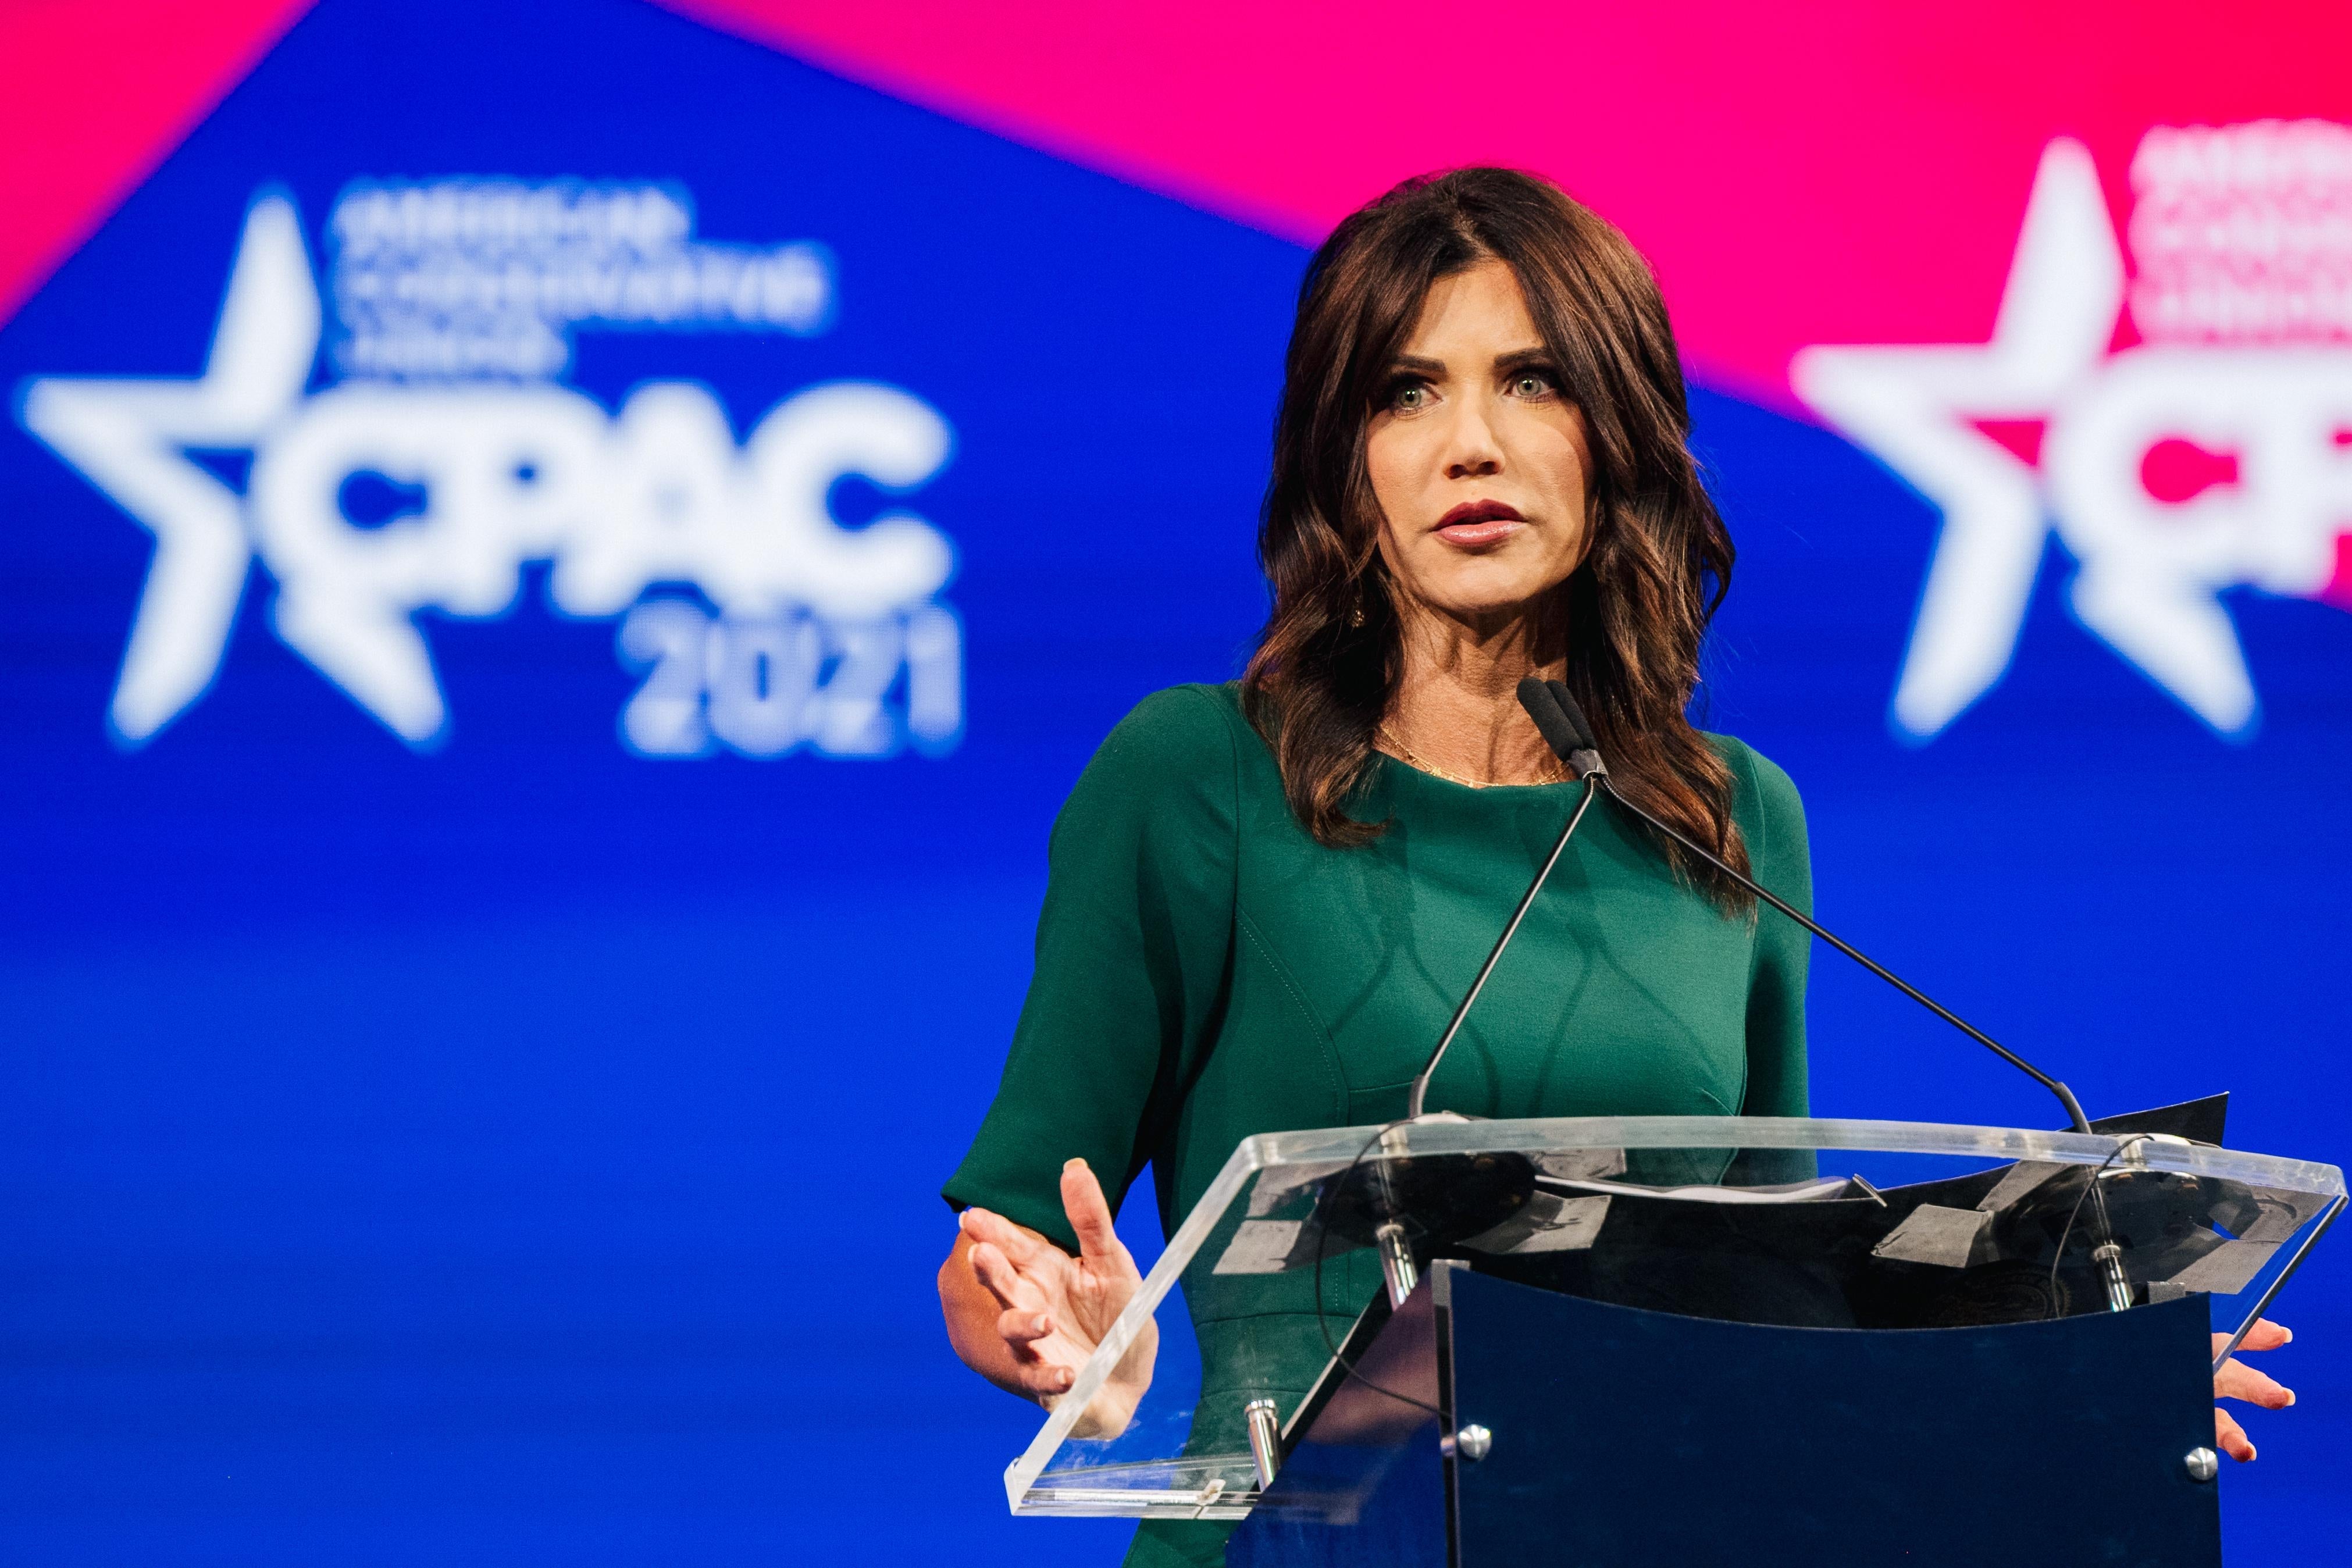 Noem speaks at a podium with the CPAC logo on a backdrop behind her